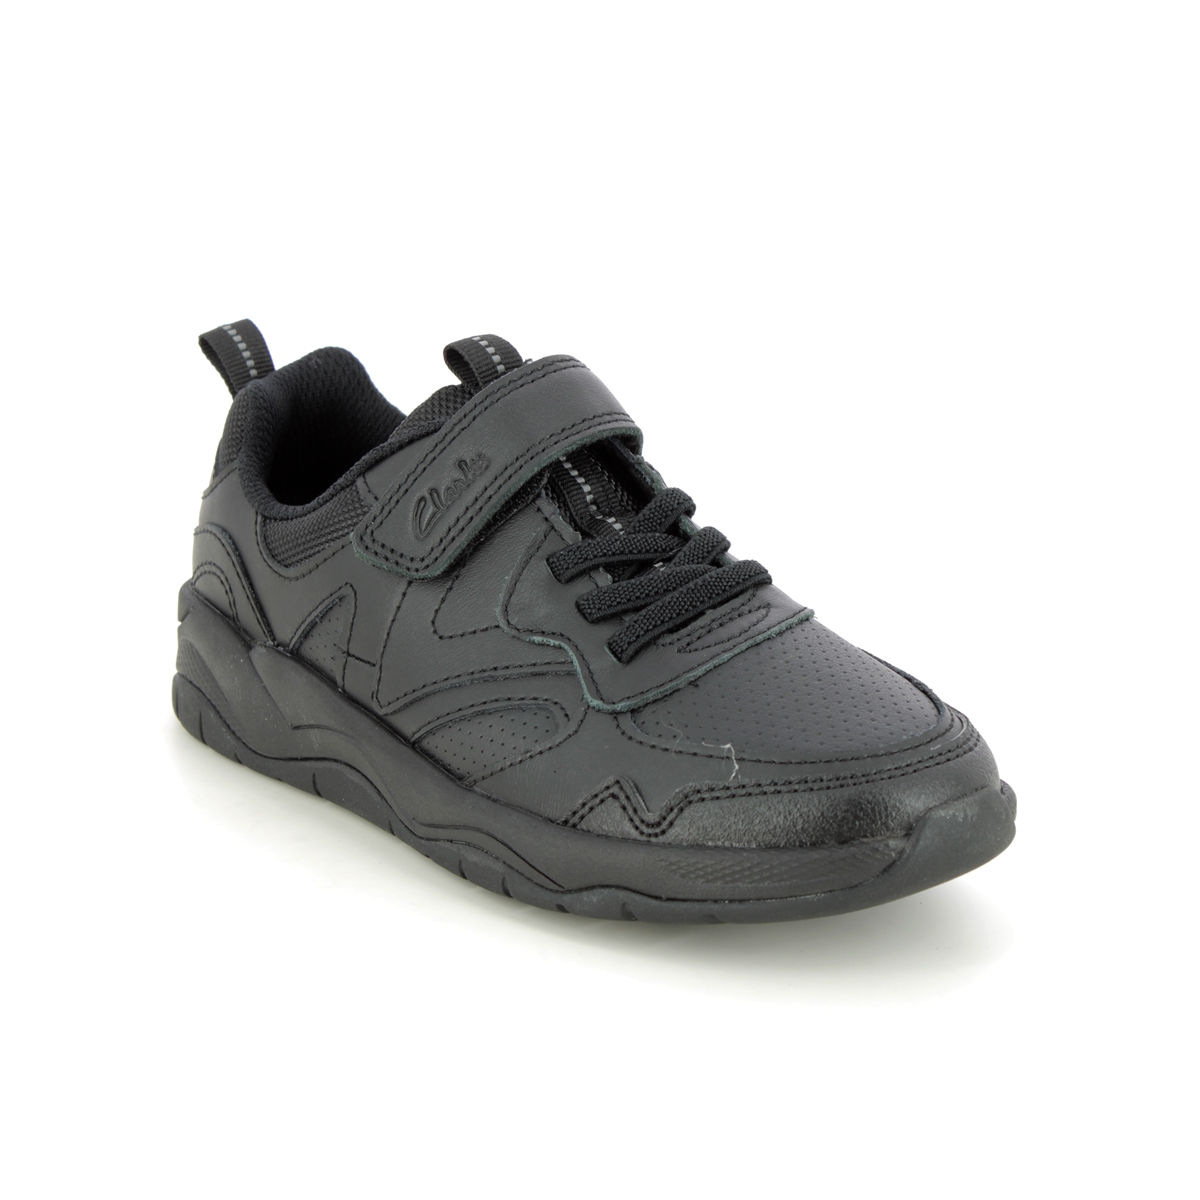 Clarks Clowder Sprint O Black leather Kids Boys Shoes 6617-06F in a Plain Leather in Size 3.5